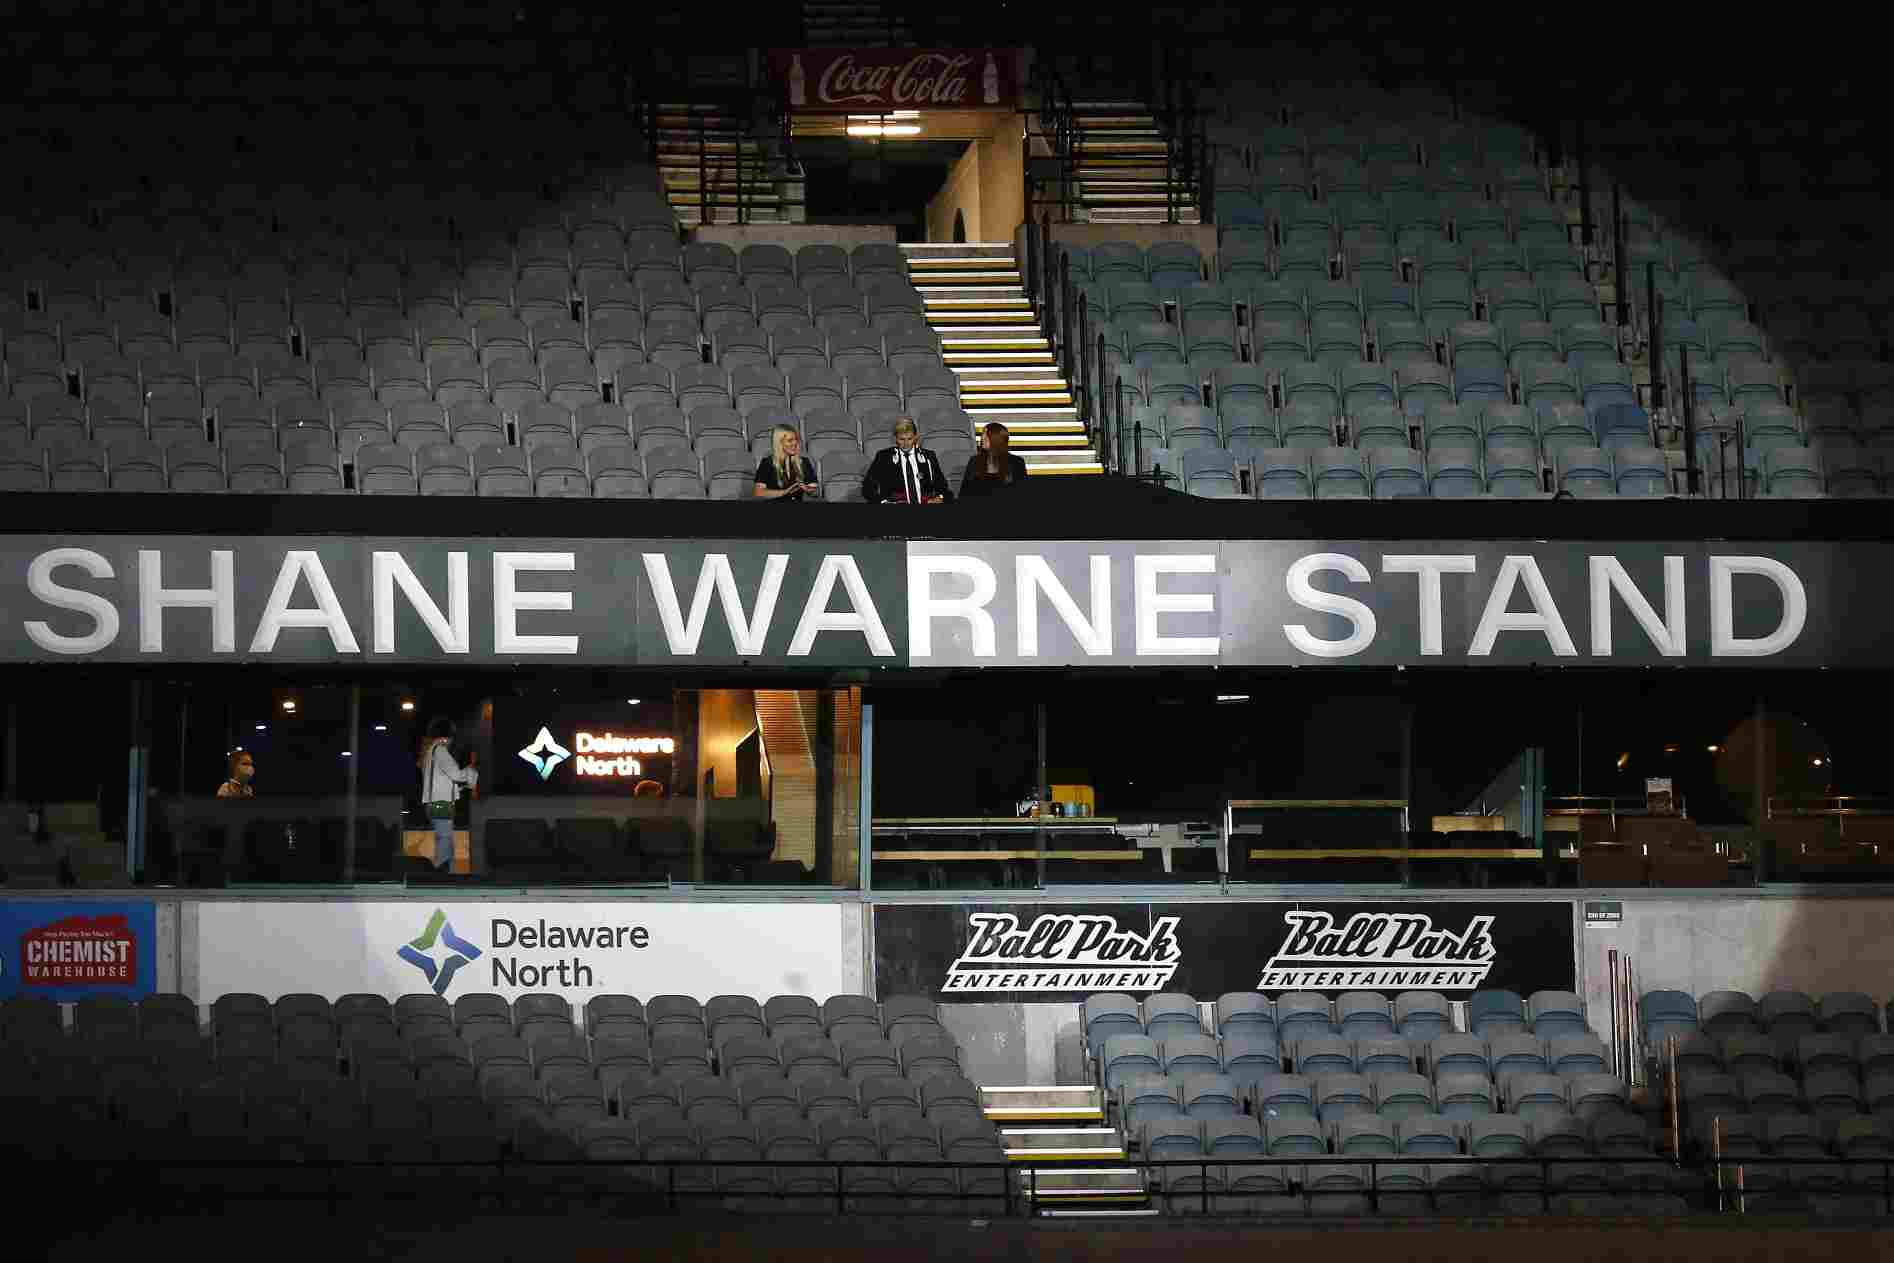 Warne Stand in MCG